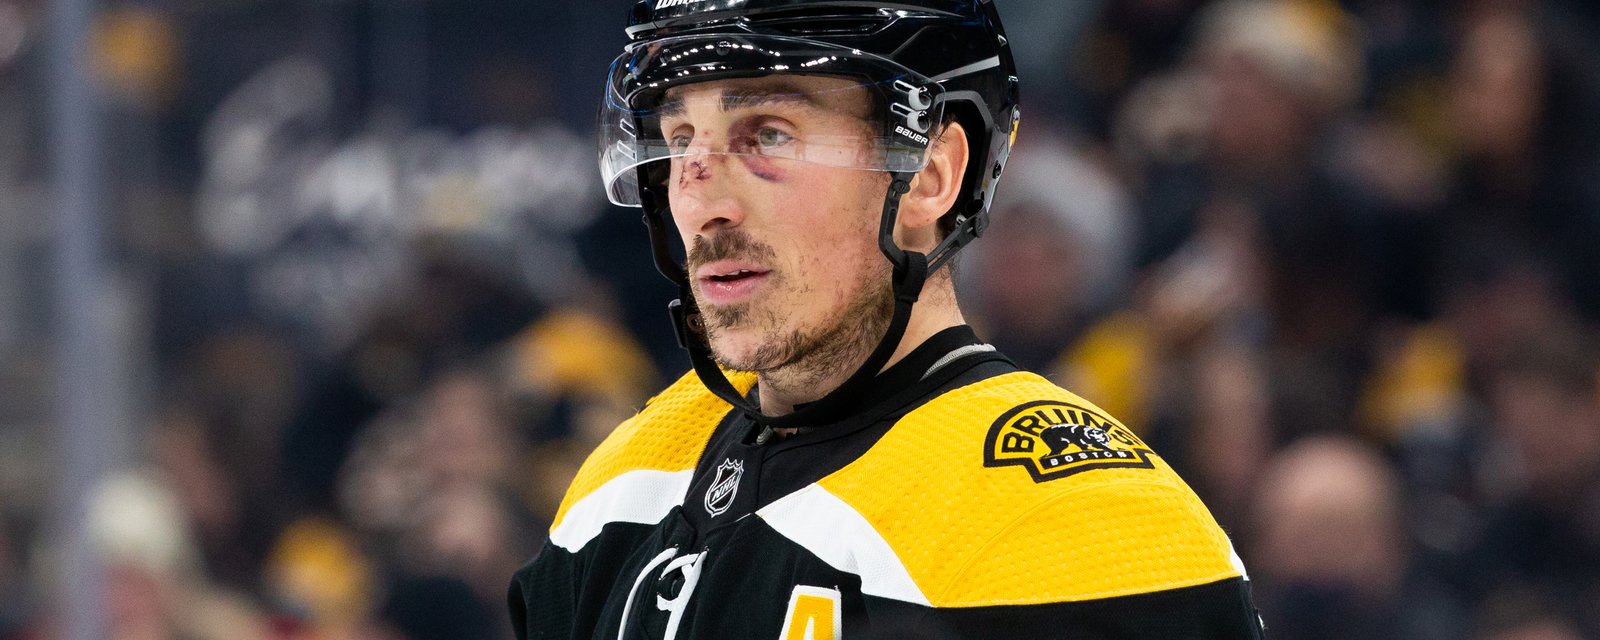 Bad news for Brad Marchand following Bruins’ elimination